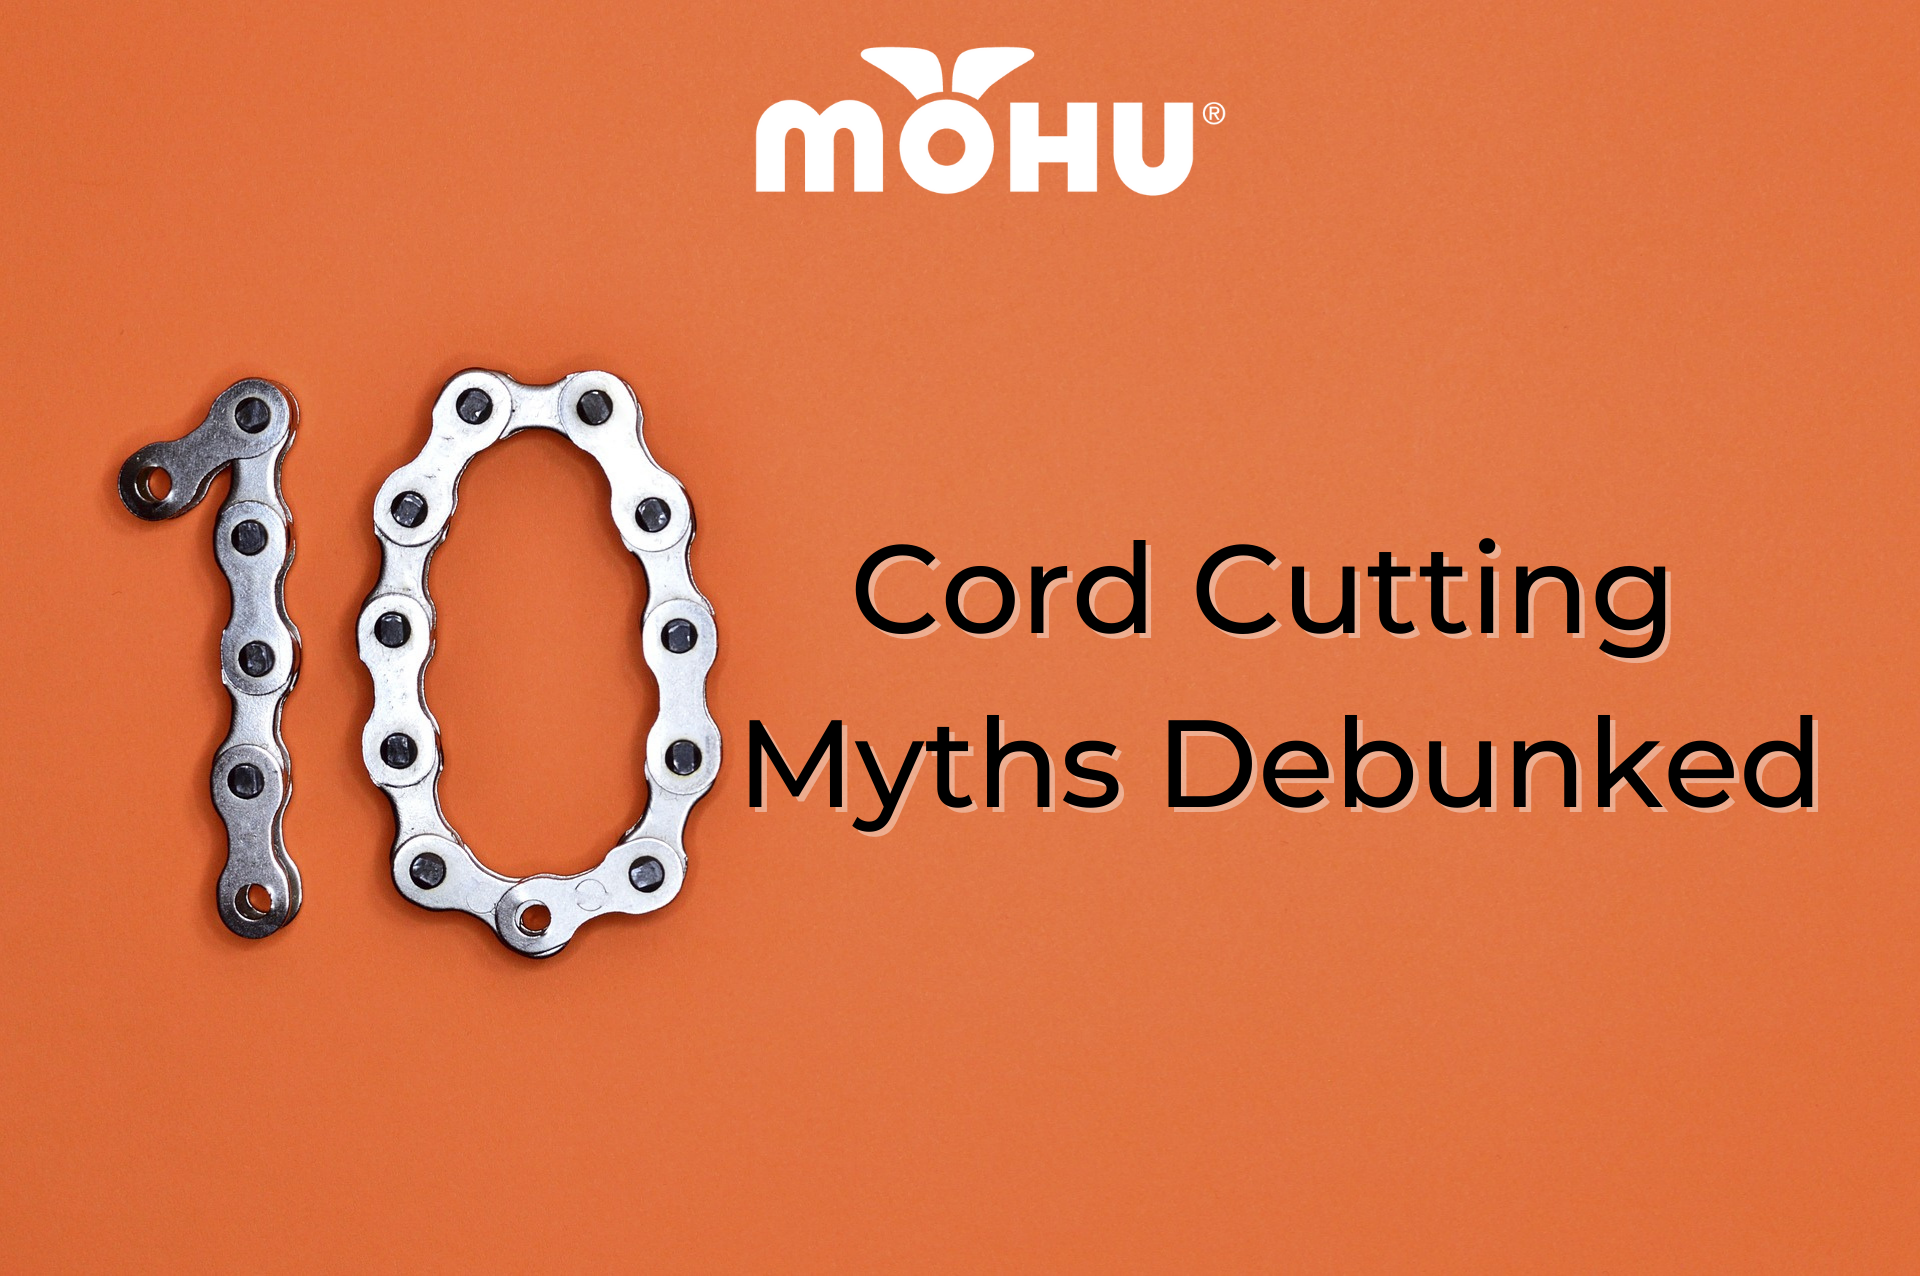 Guest Post: Top 10 Cord Cutting Myths Debunked, Mohu